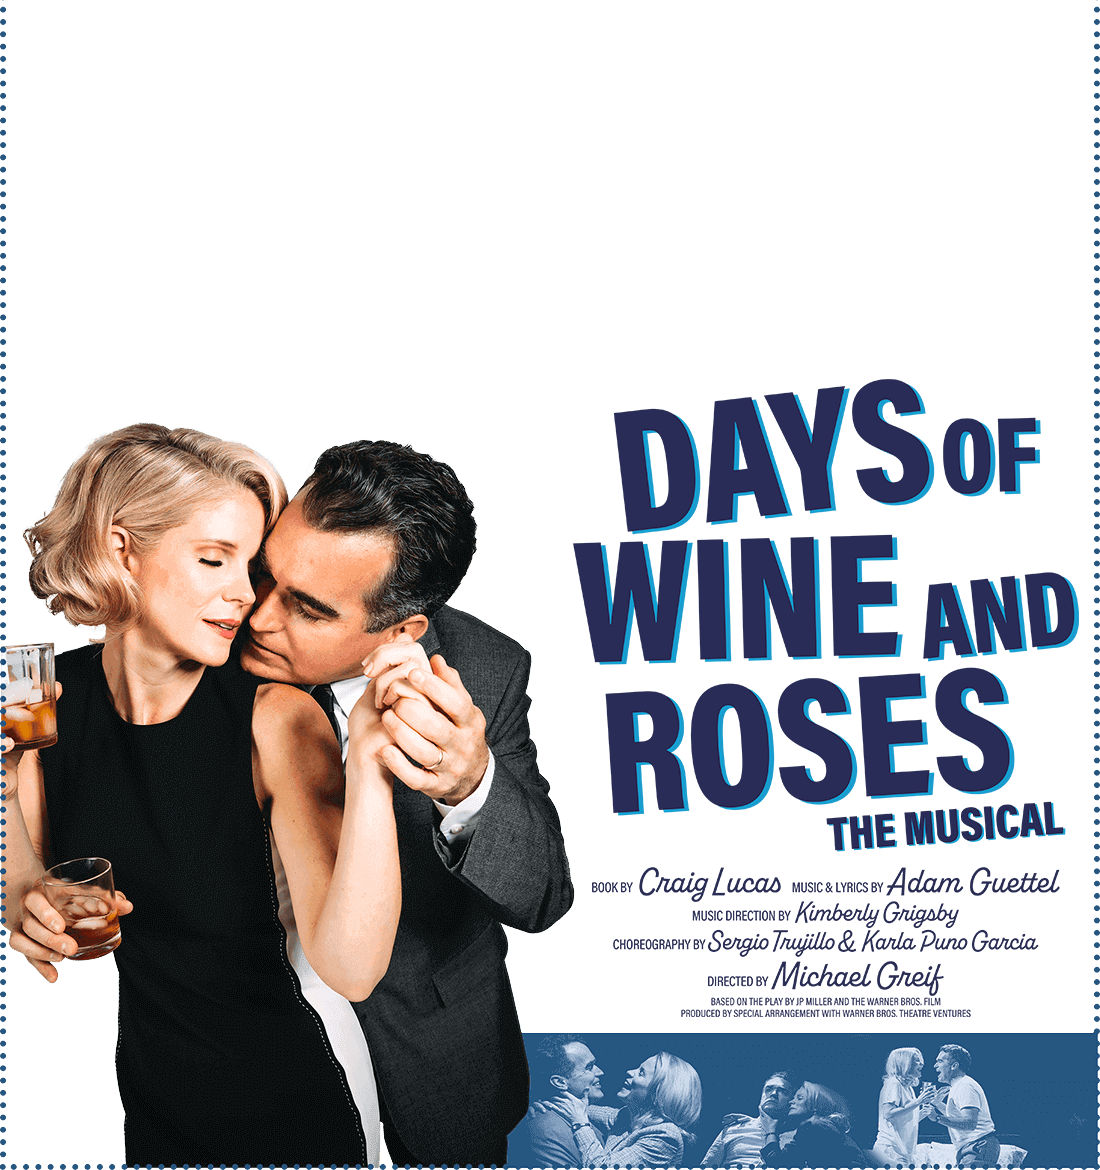 Days of Wine and Roses, starring Kelli O'Hara and Brian d'Arcy James